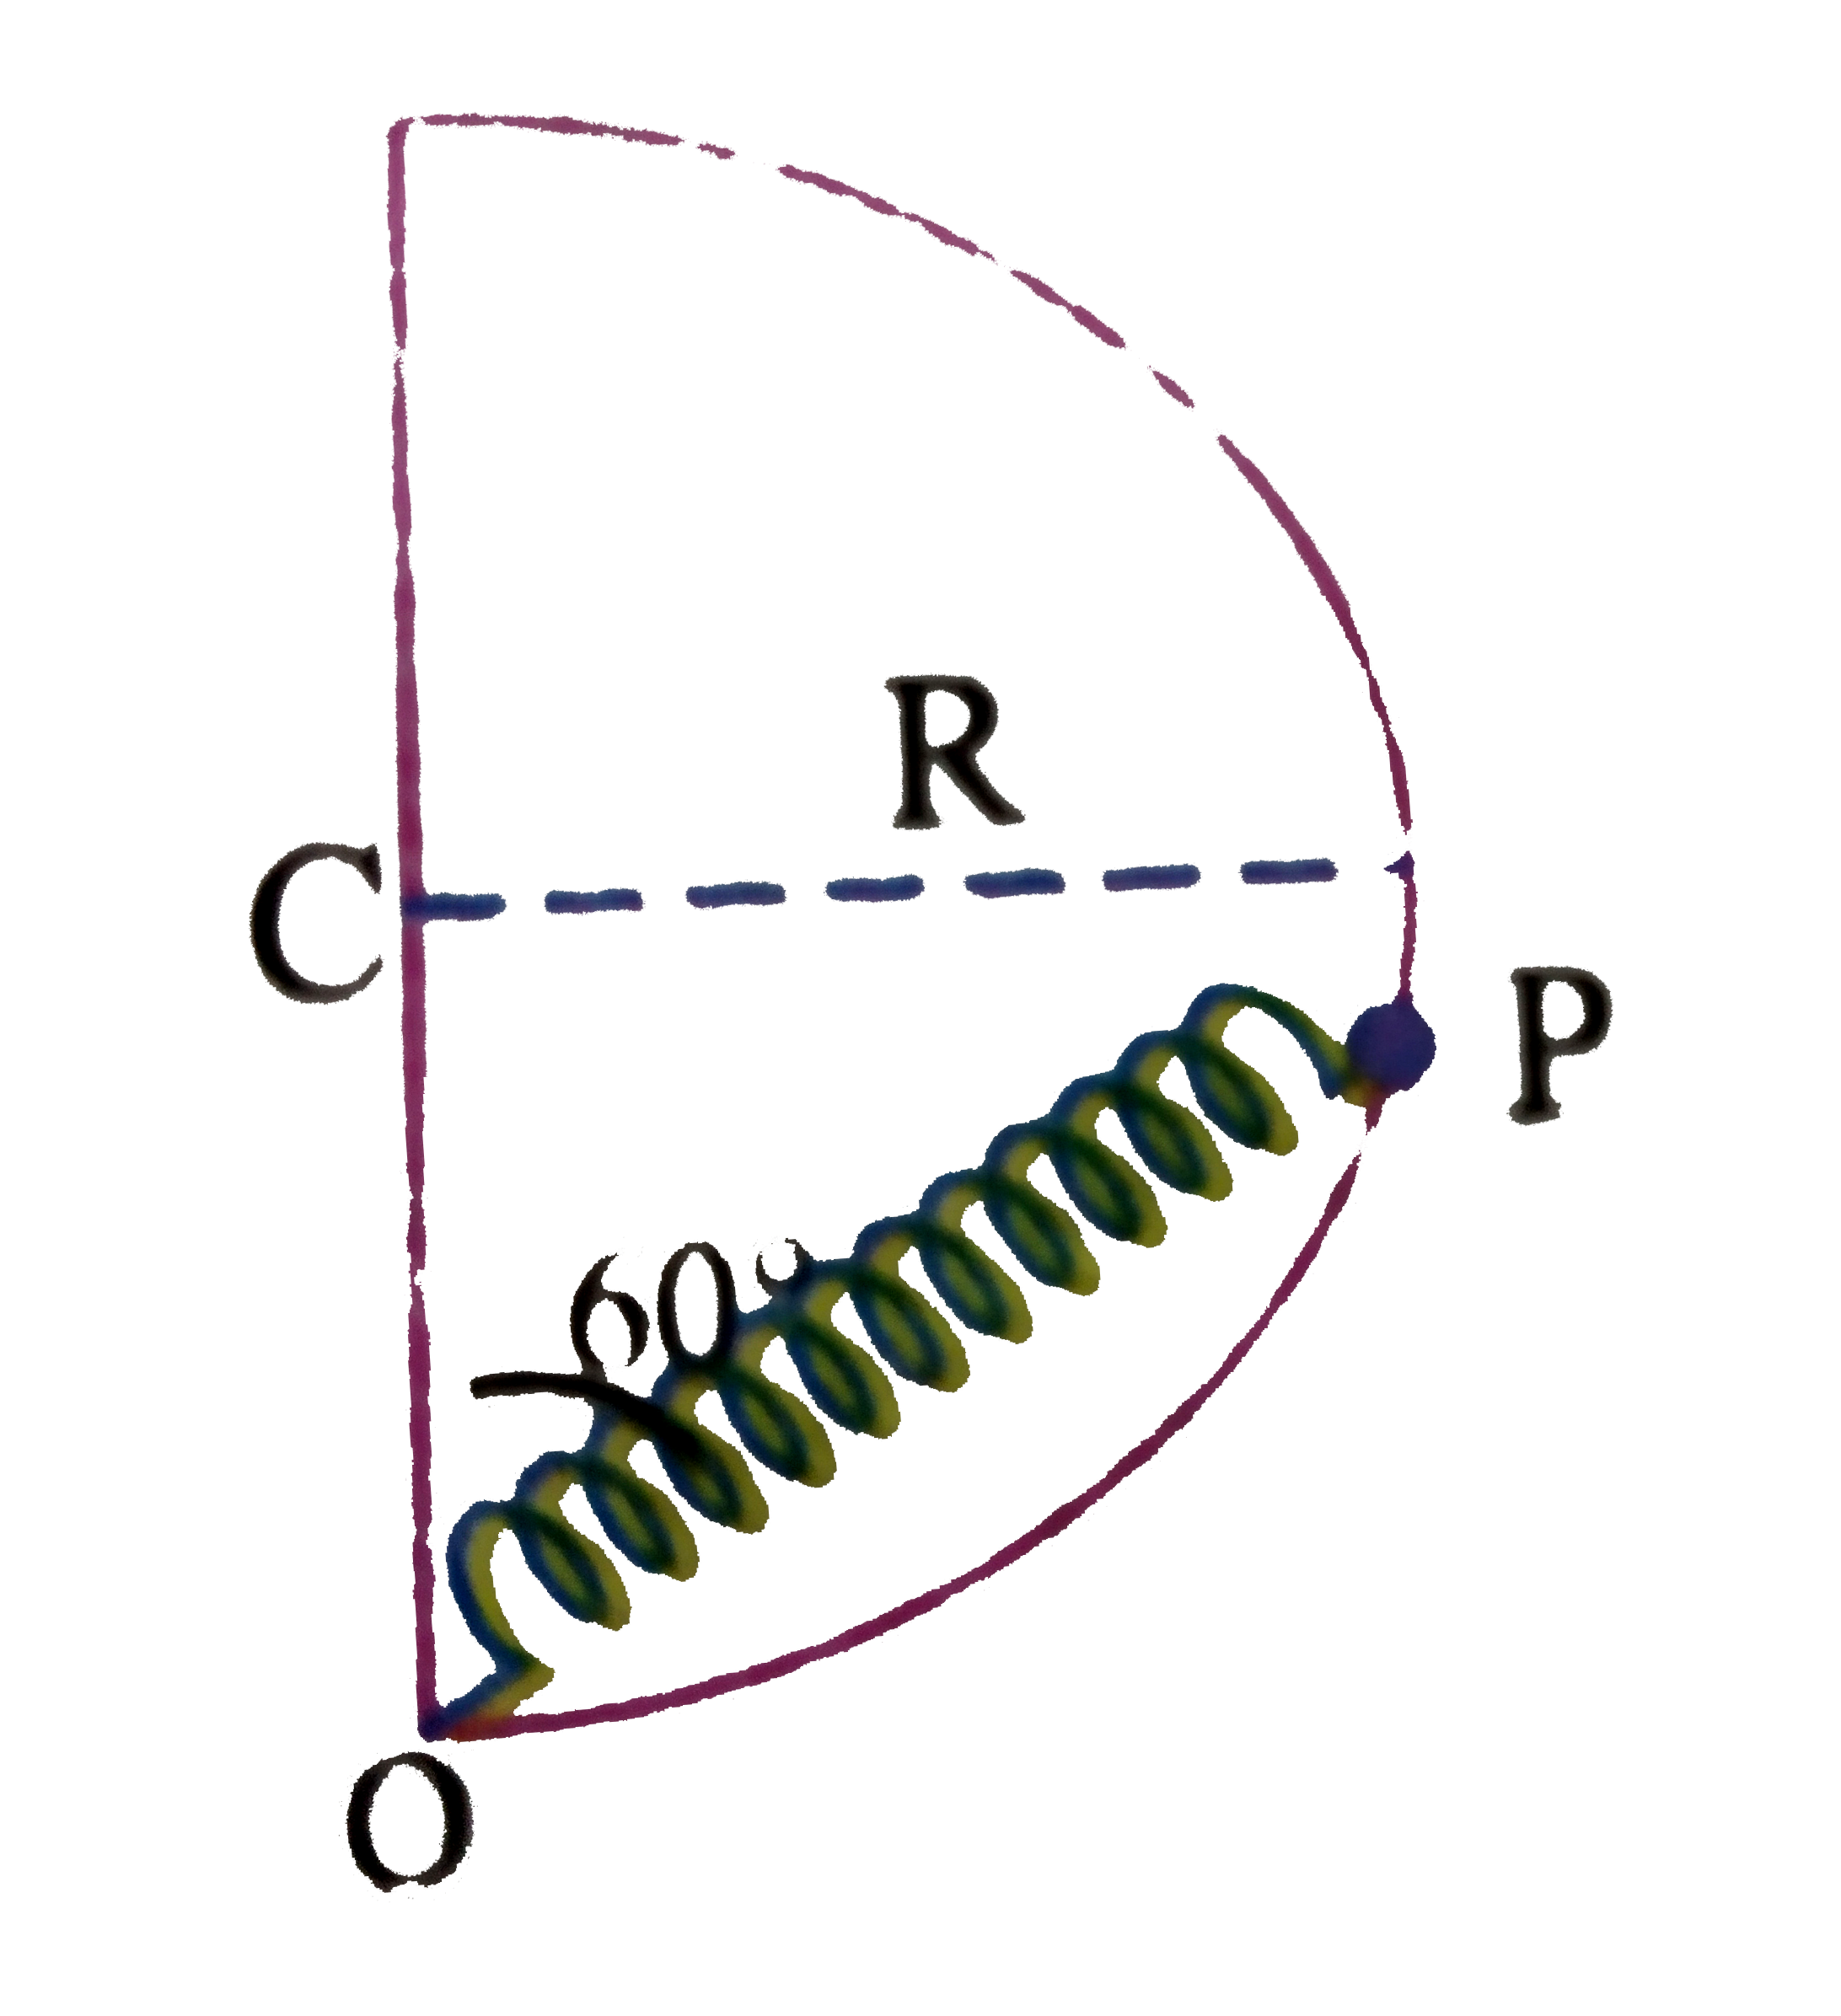 A smooth semicircular wire track of radius R if fixed in a vertical plane. One end of massless spring of netural length (3R)/(4) is attached to the lowest point O of the wire track. A small ring of mass m which can slide on the track is attched to the other end of the spring. the ring is held stationary at point P such that the spring makes an angle of 60^(@) with the vertical. The spring constant is K = (mg)/(R ). considering the instance when the ring is released, the free body diagram of the ring, when a(T) is tengential acceleration, F is restoring force and N is normal reaction is